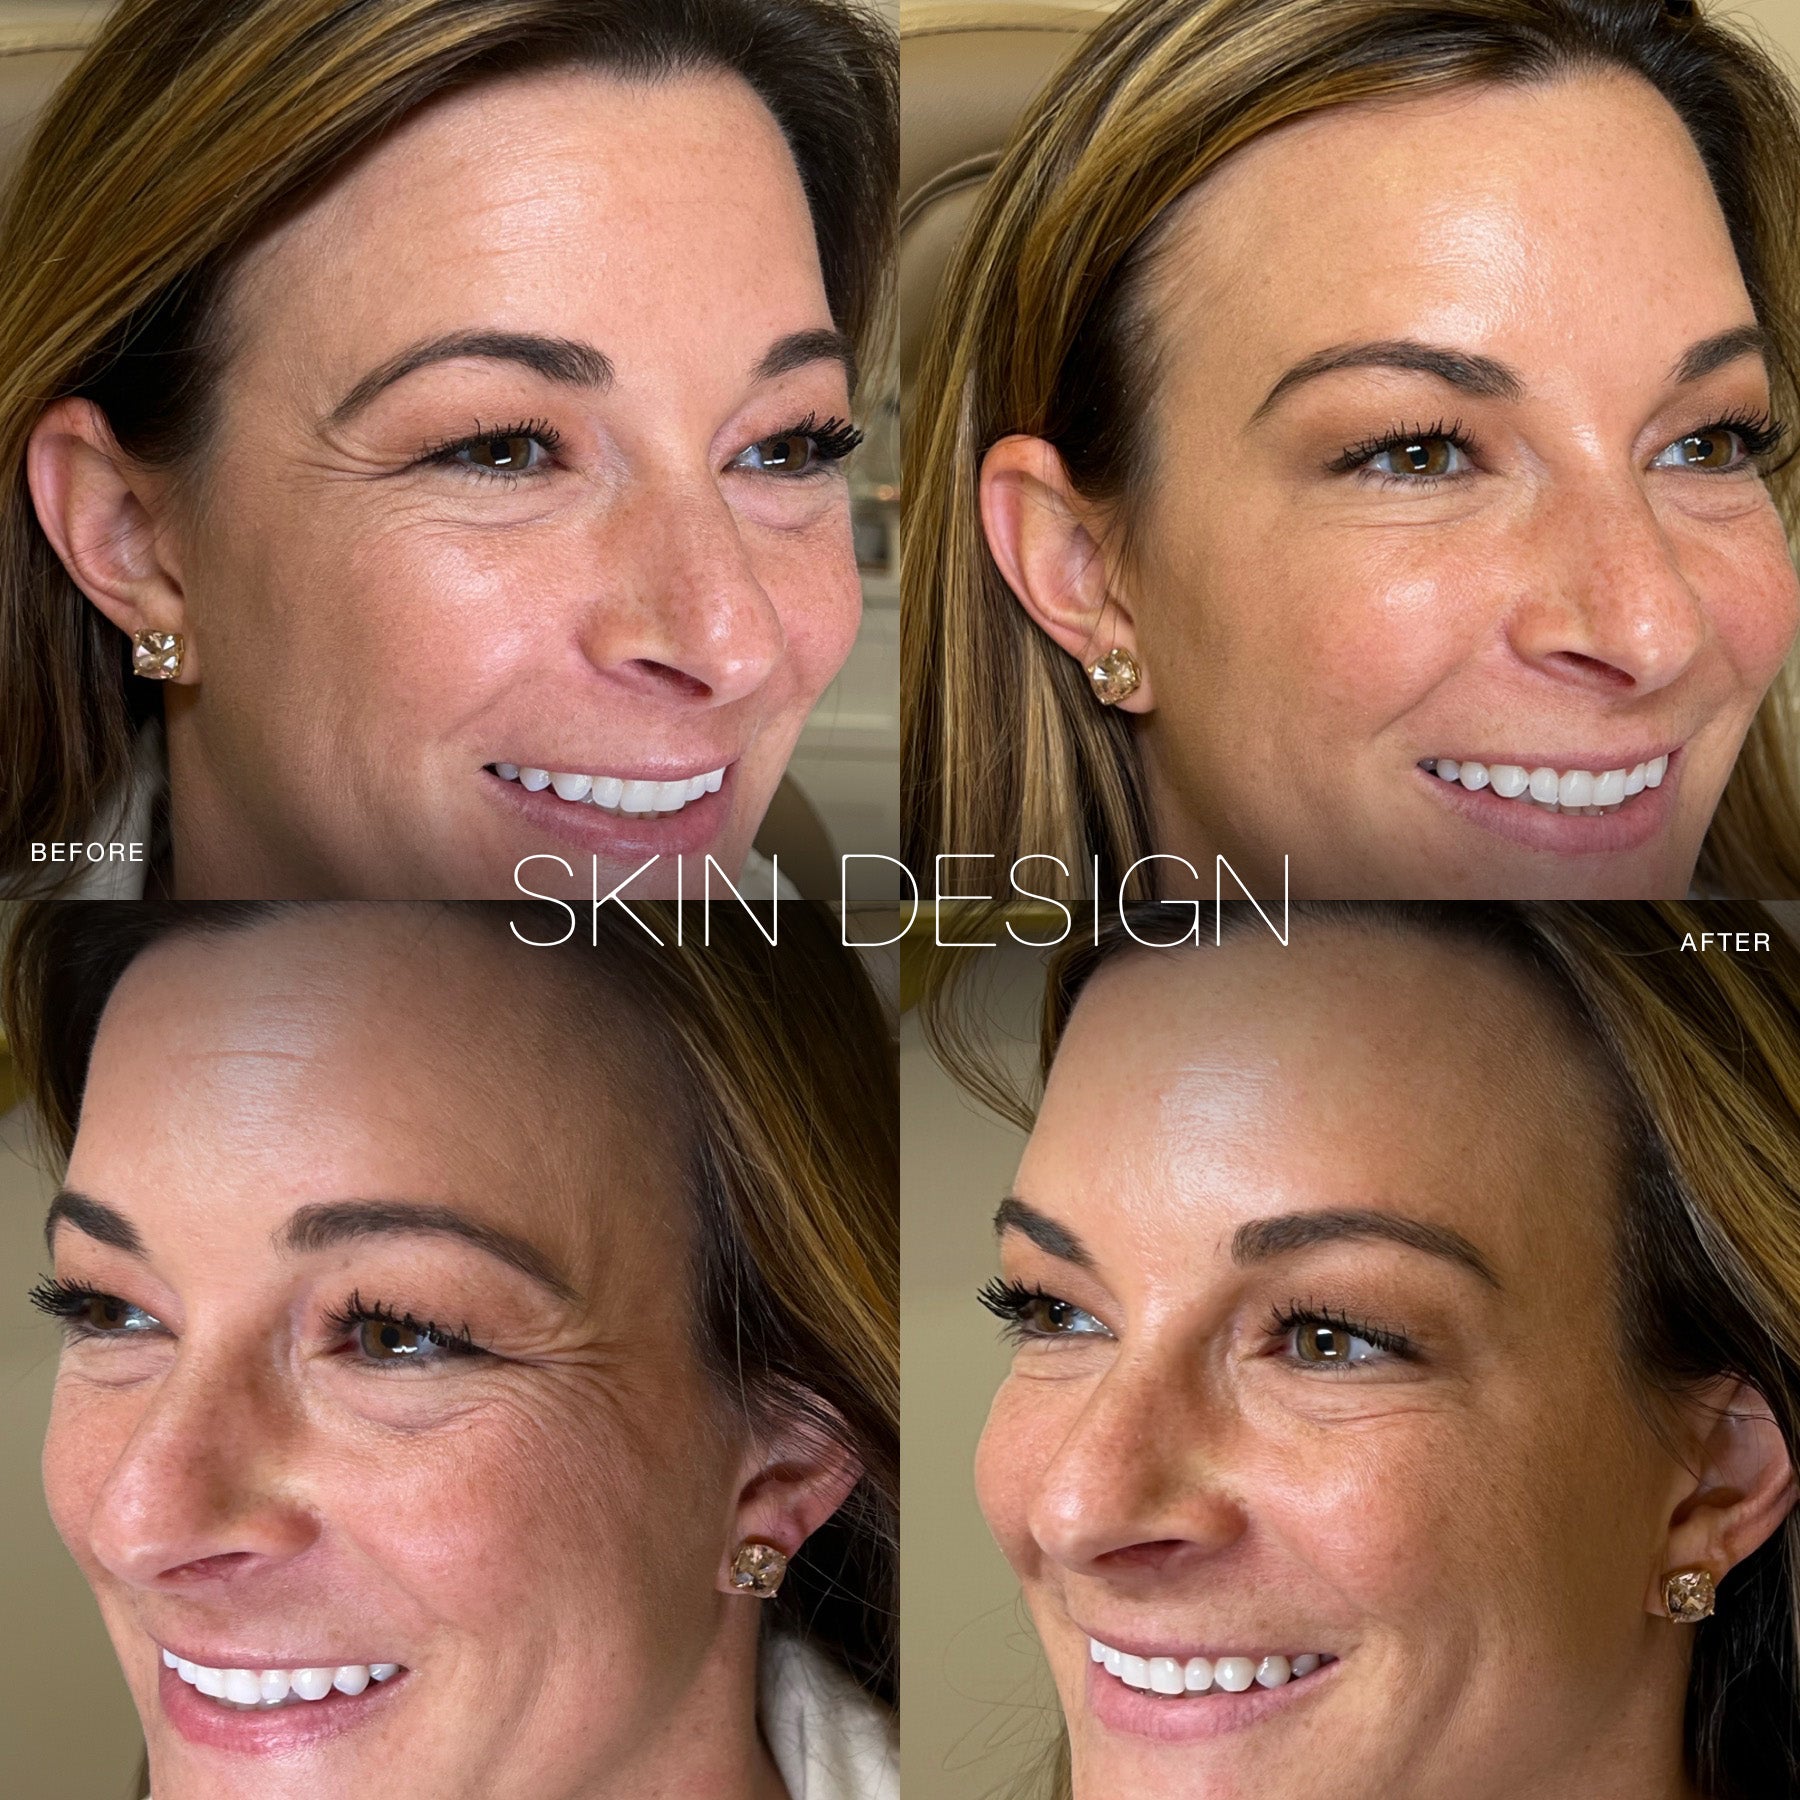 wrinkle relaxers botox dysport before and after results for forehead lines skin design aesthetics medical spa 